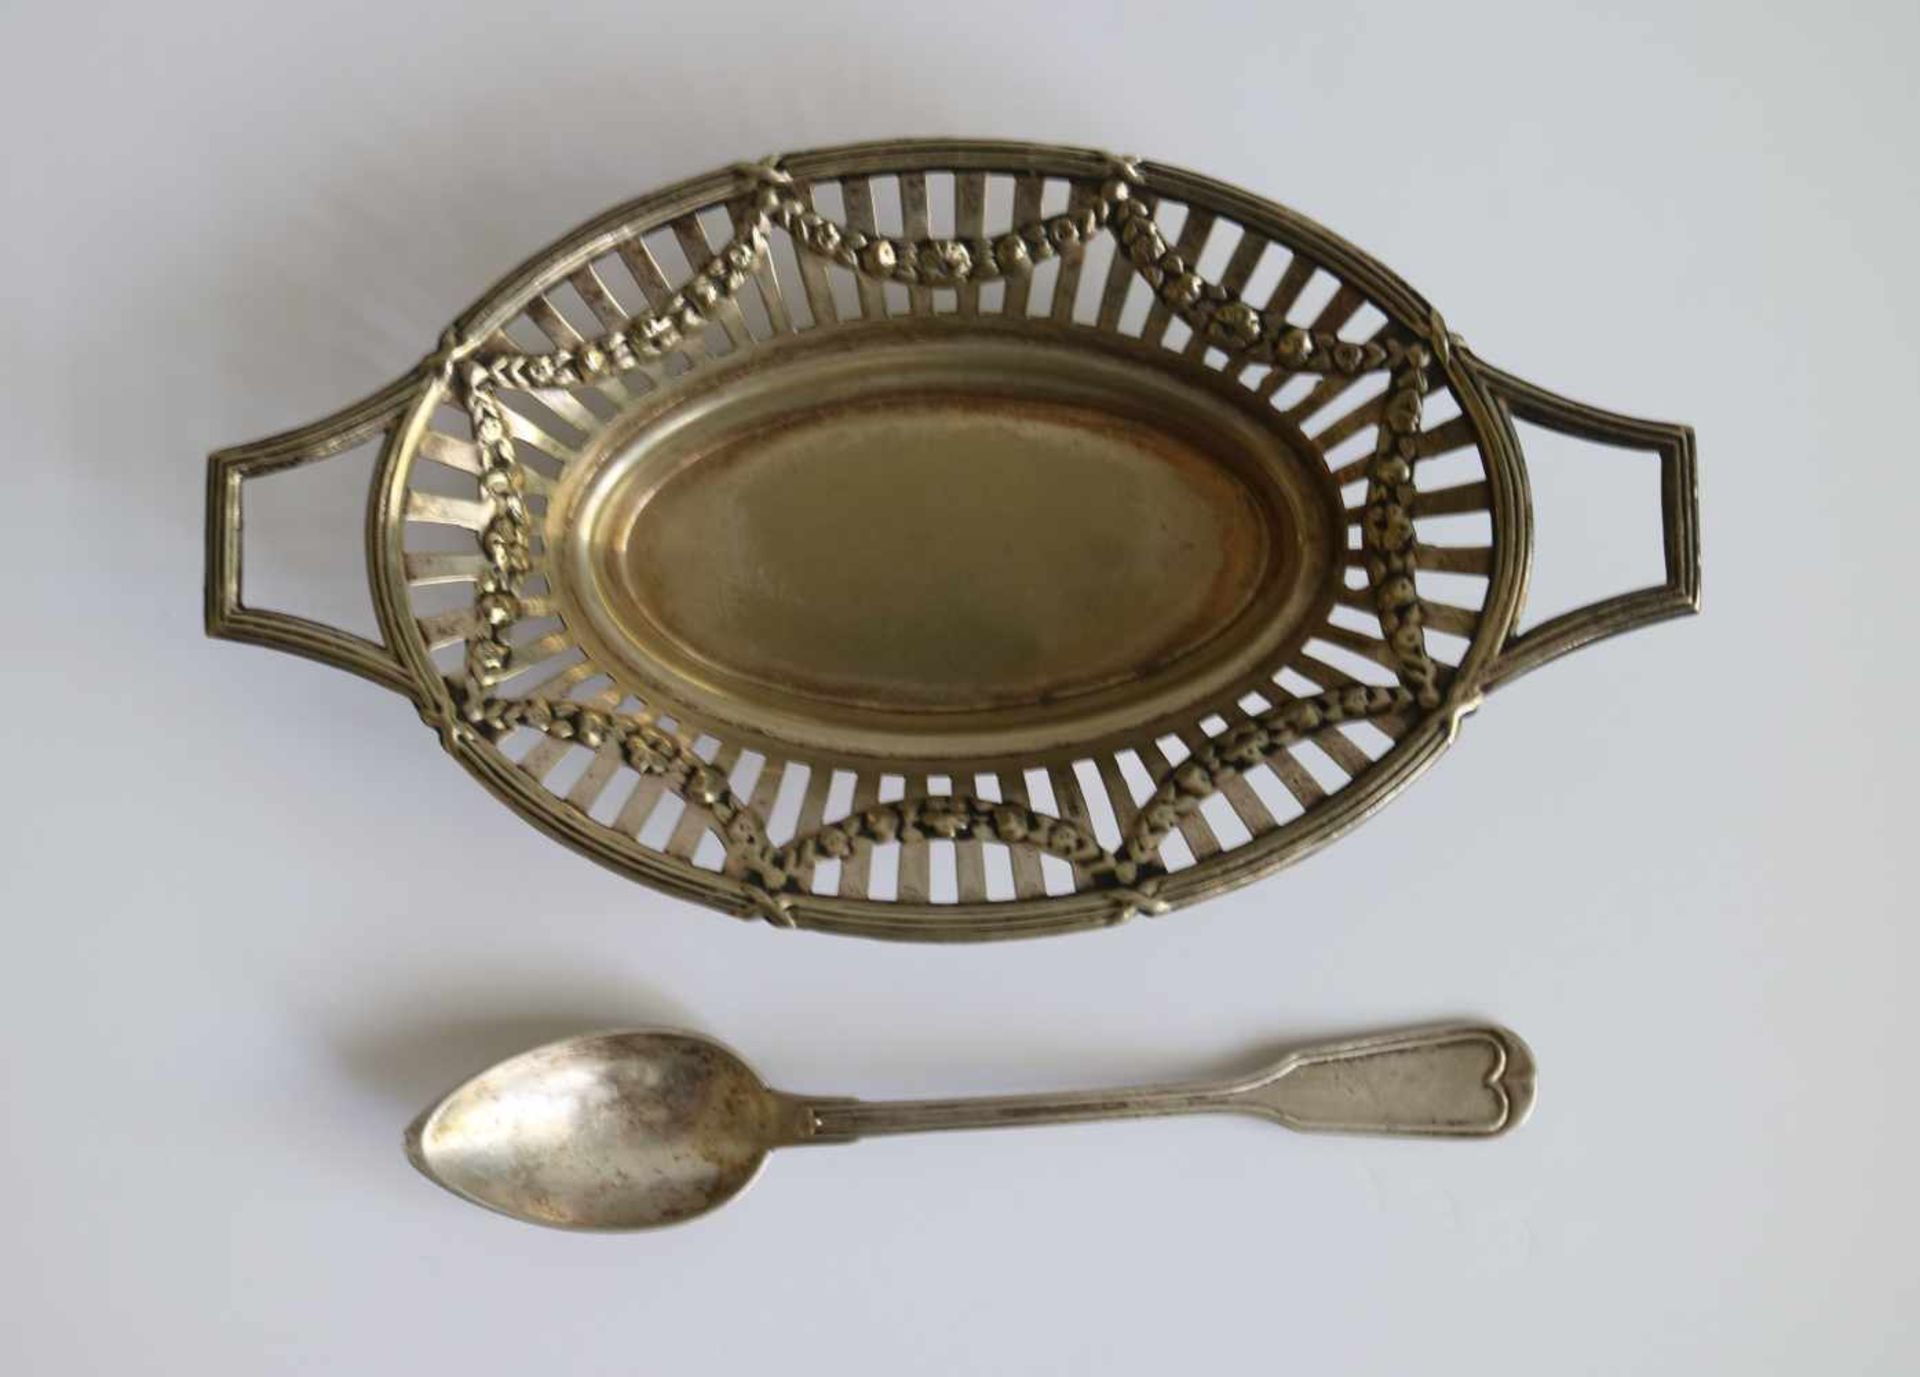 Delheid tray silver platter with mirror glass (Delheid) + silver plated dish, bowl and spoon 51 x - Image 2 of 4